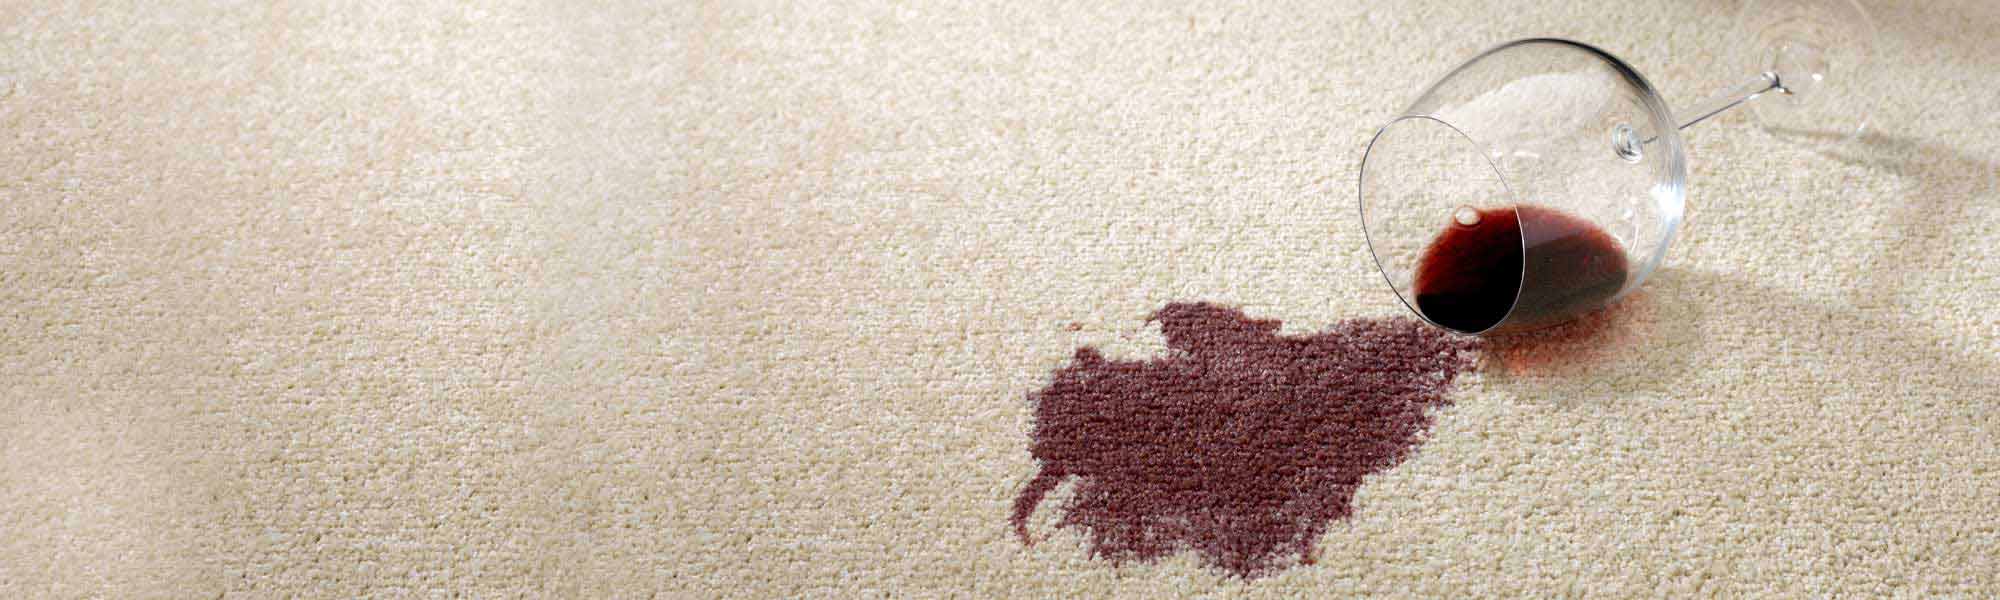 Professional Stain Removal Service by Chem-Dry of the Foothills